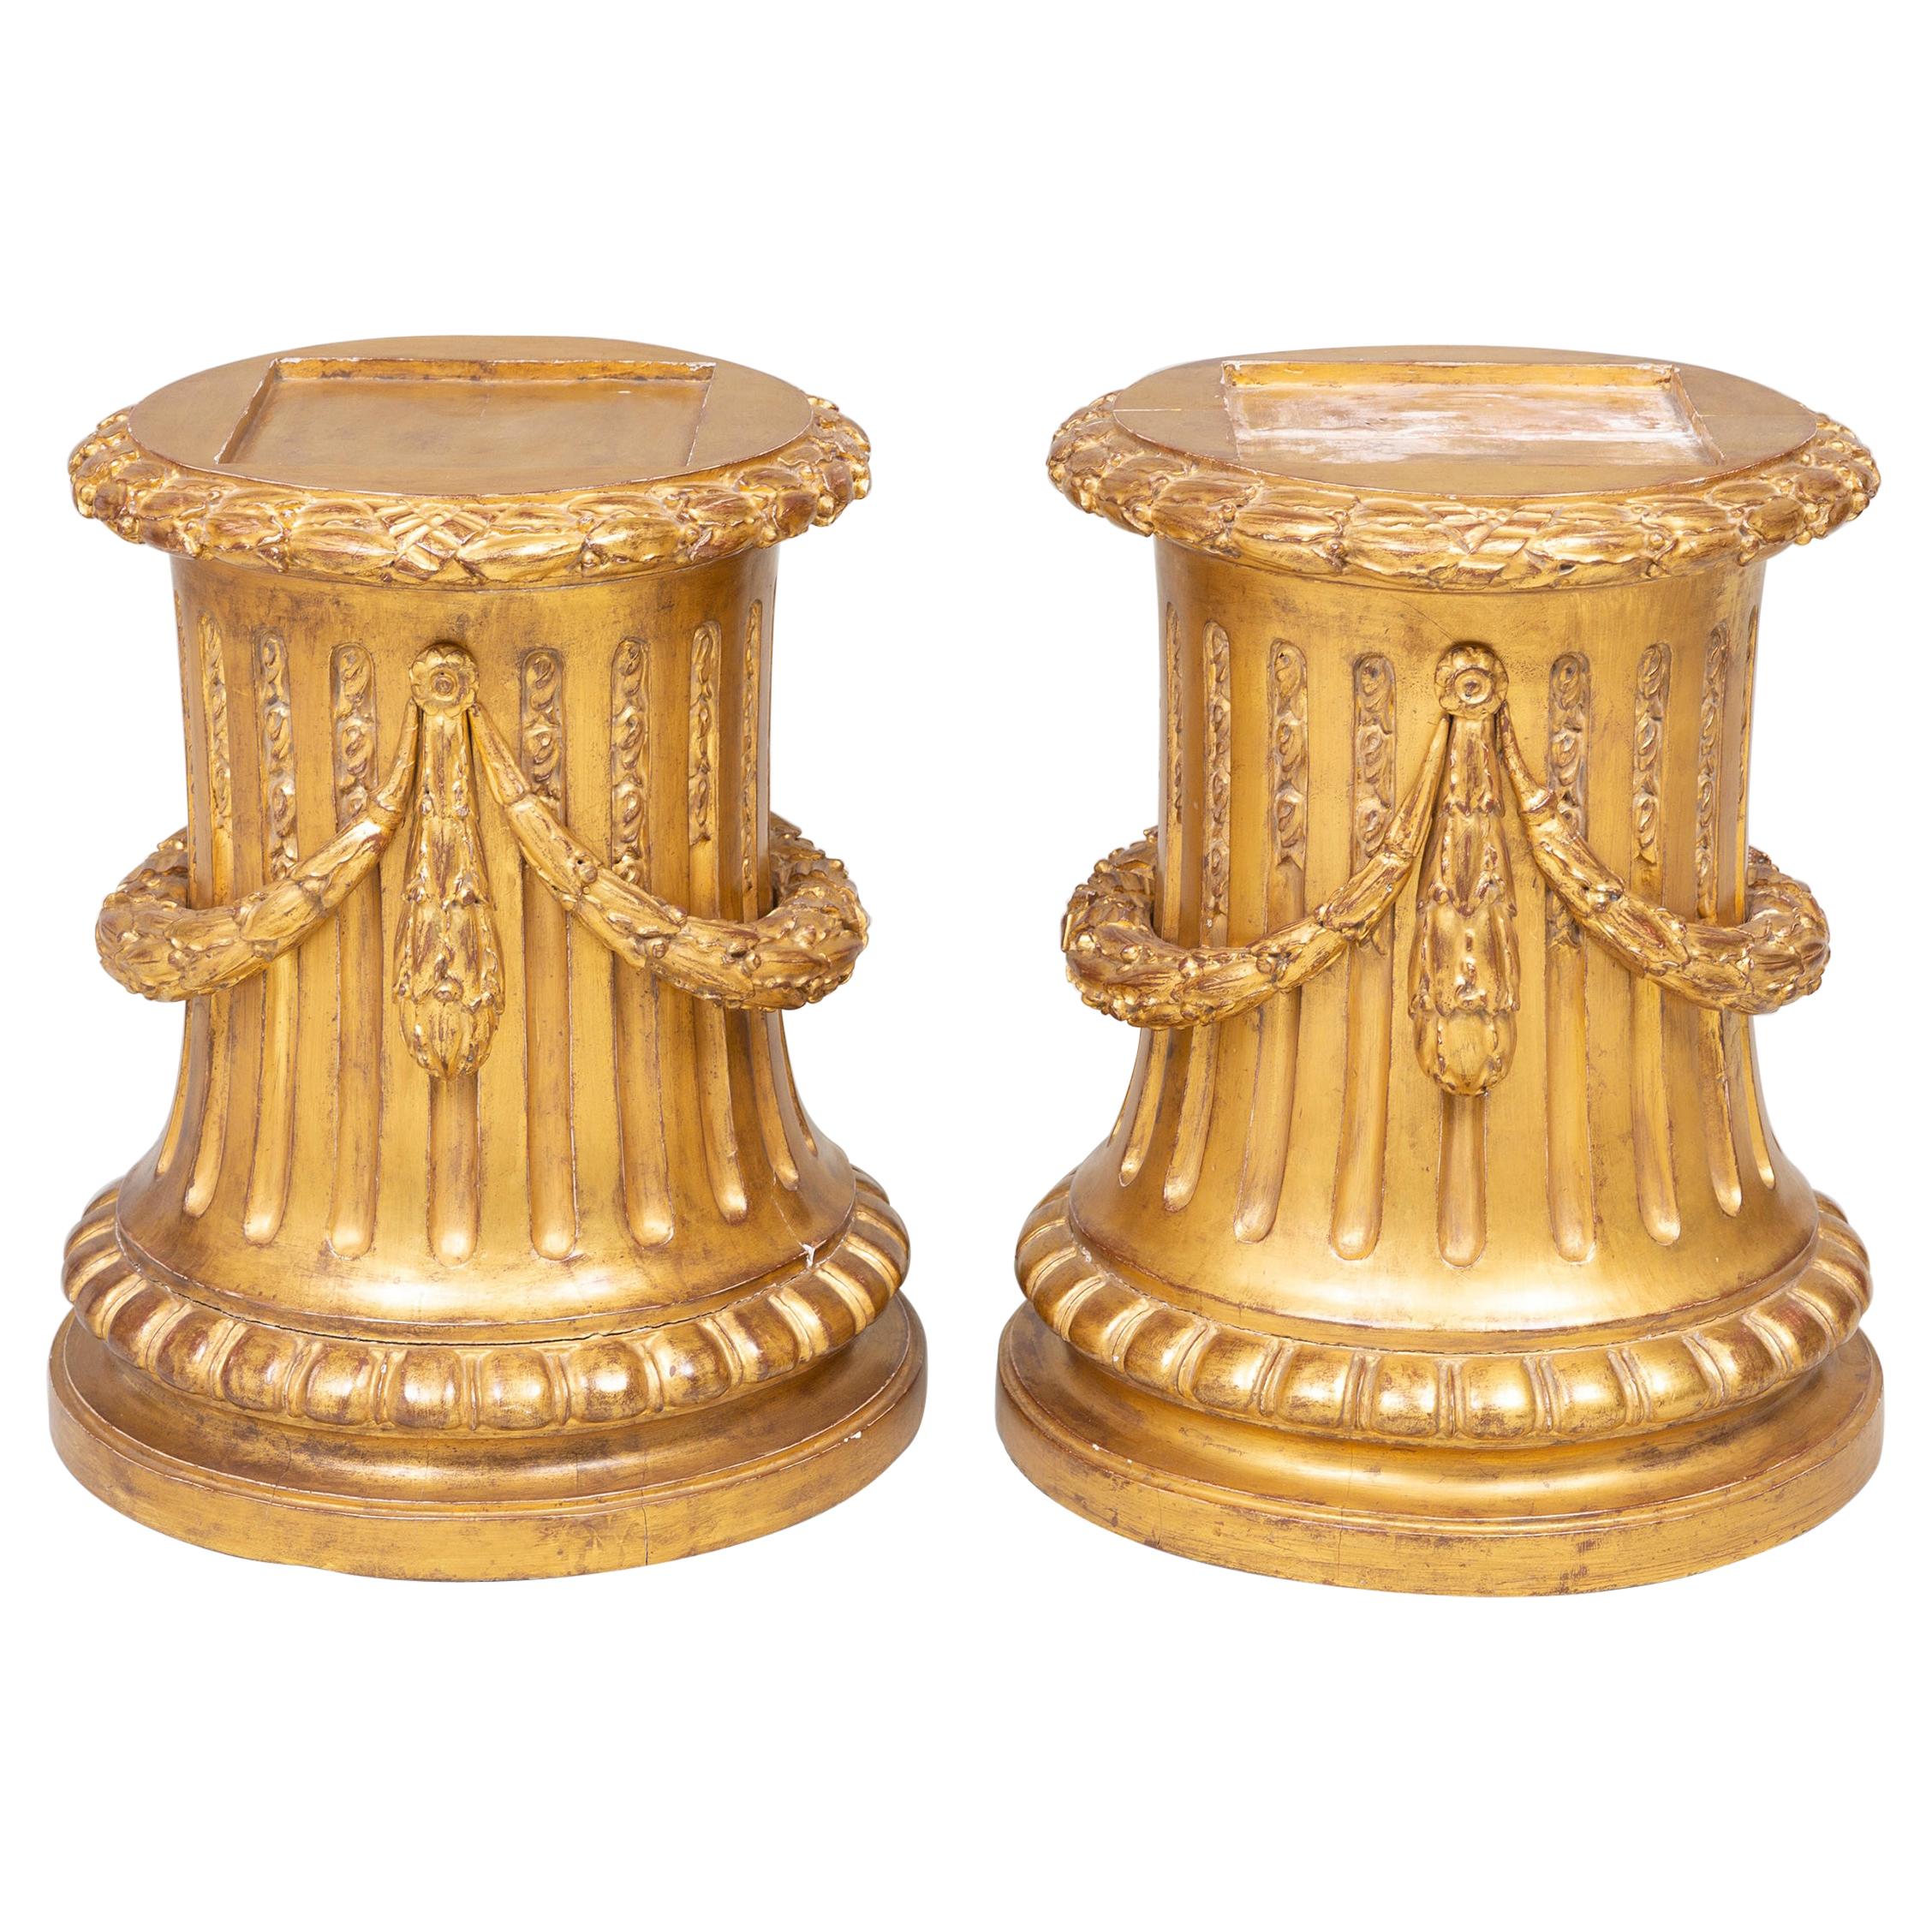 Pair of French Louis XVI Style Giltwood Footed Plinths